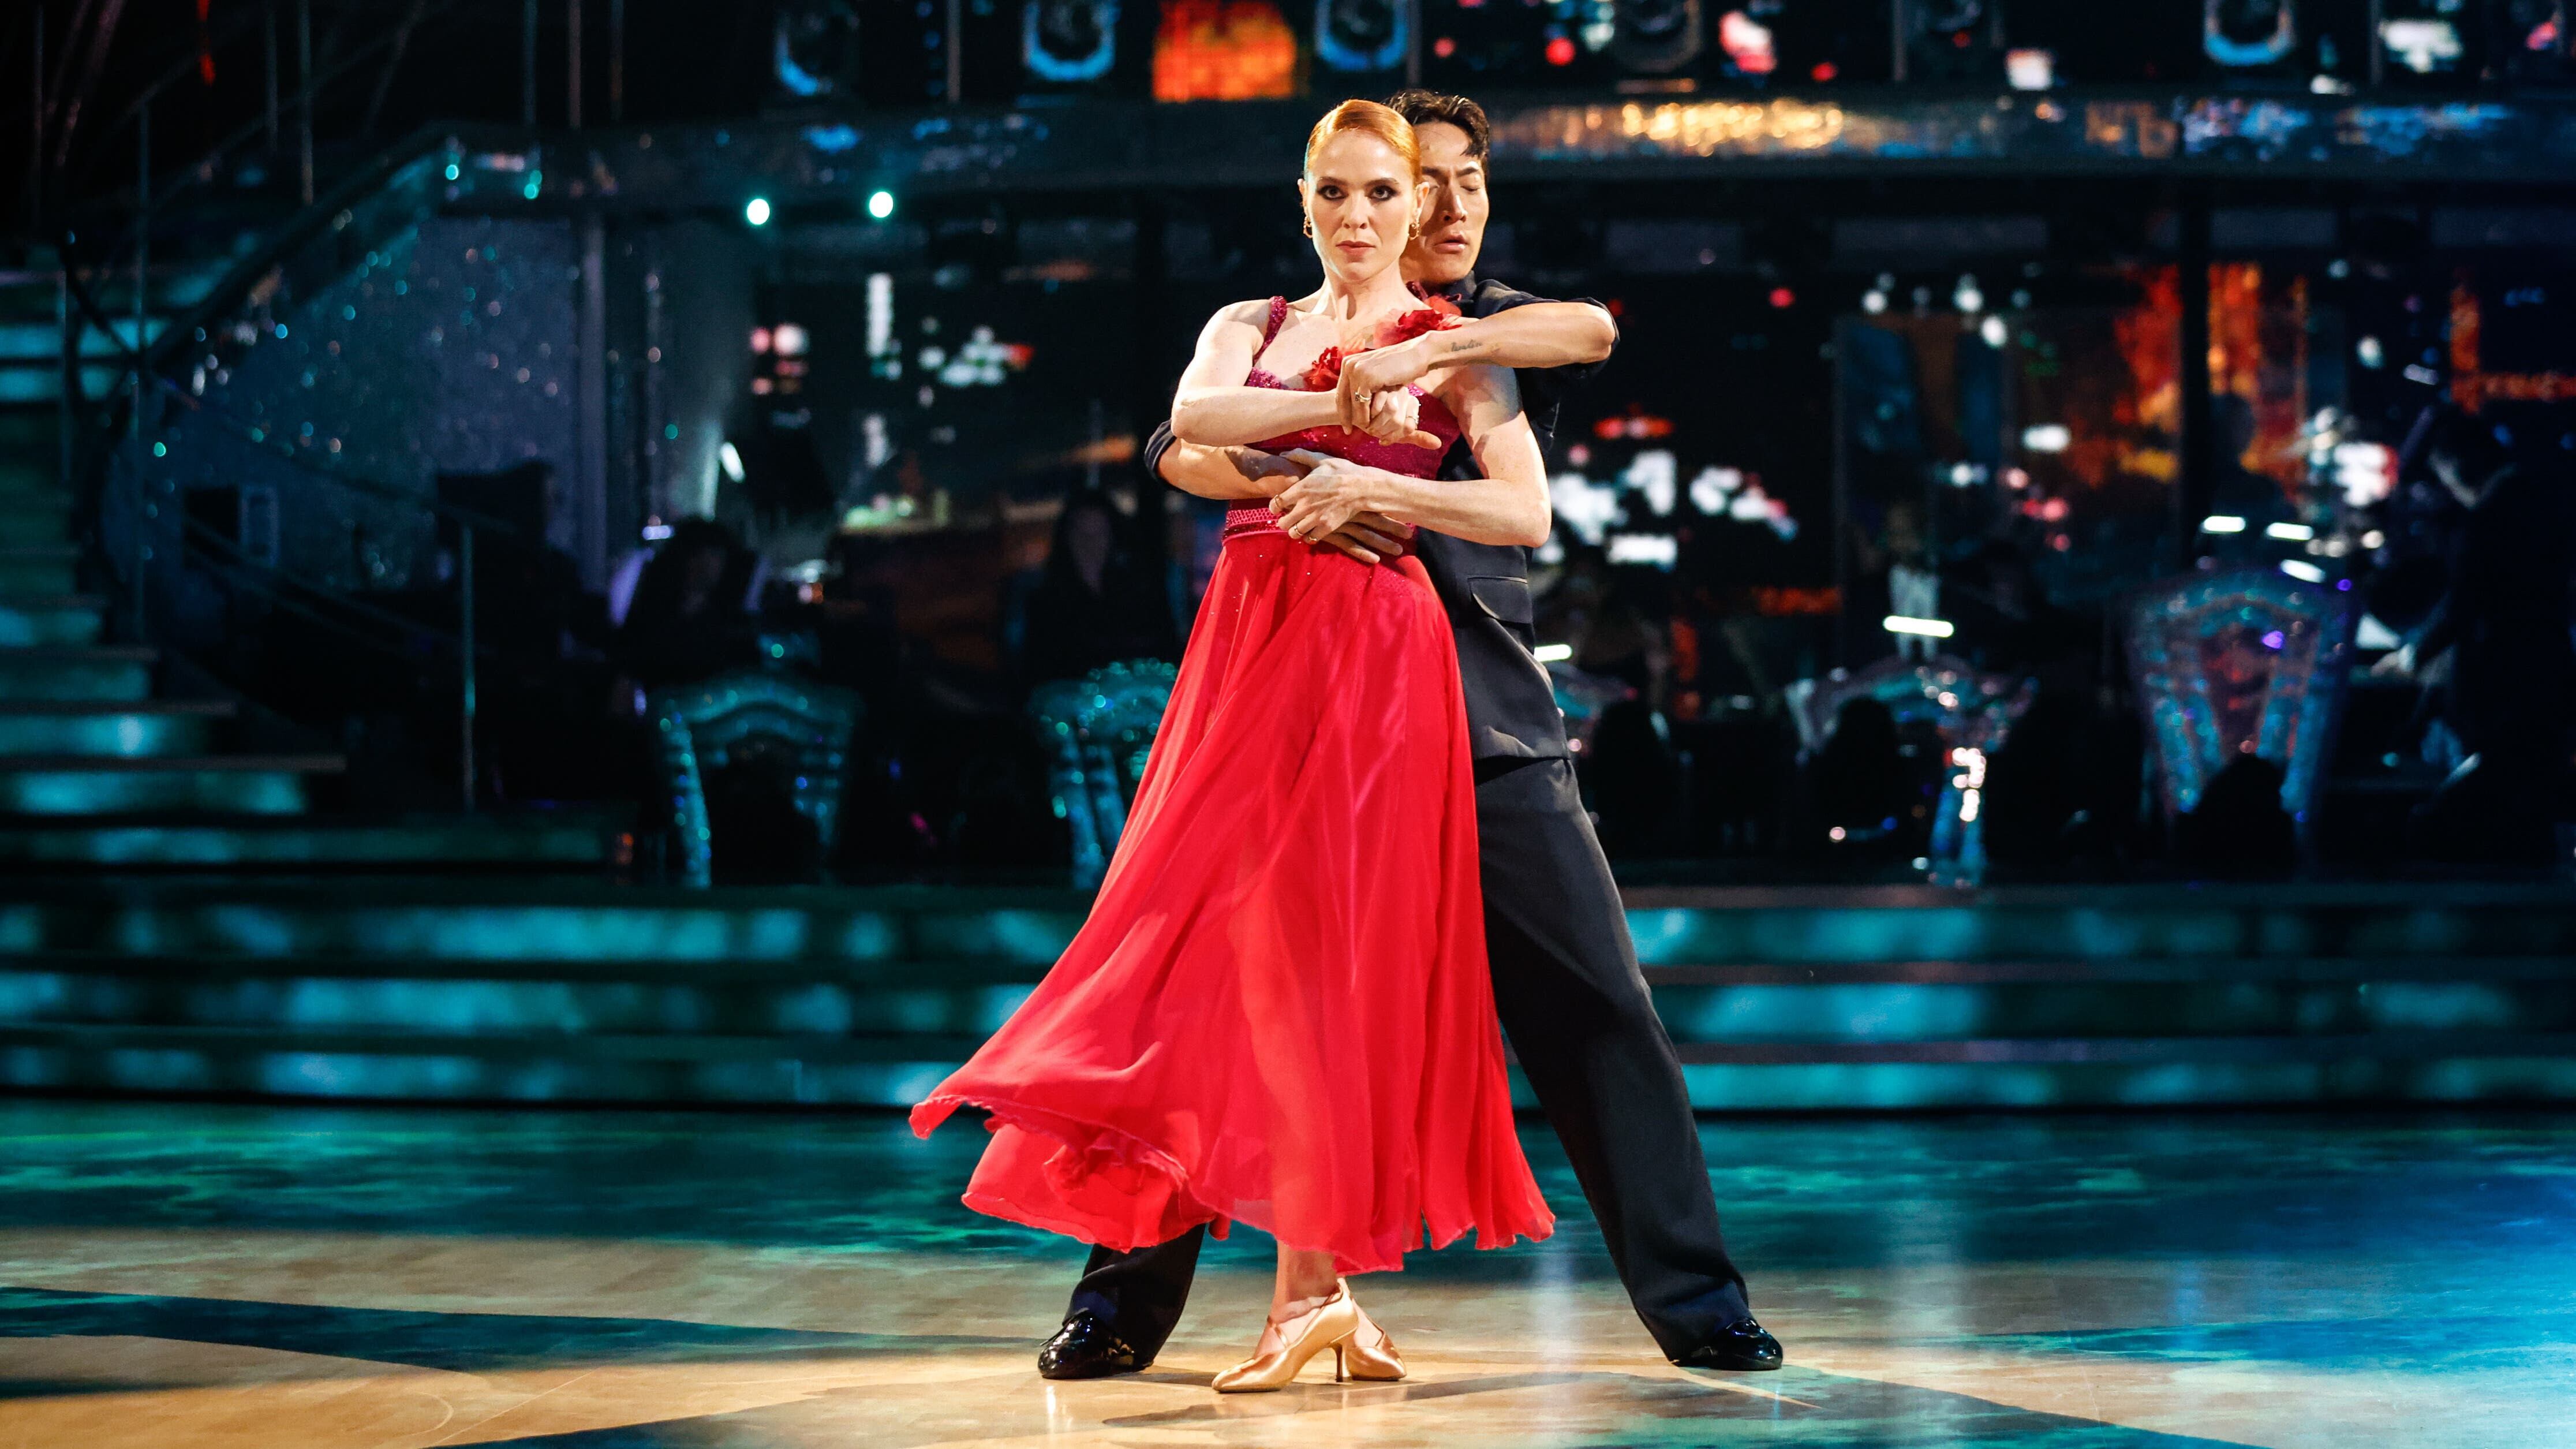 Angela Scanlon and Carlos Gu during Strictly Come Dancing’s live show on Saturday (Guy Levy/BBC/PA)